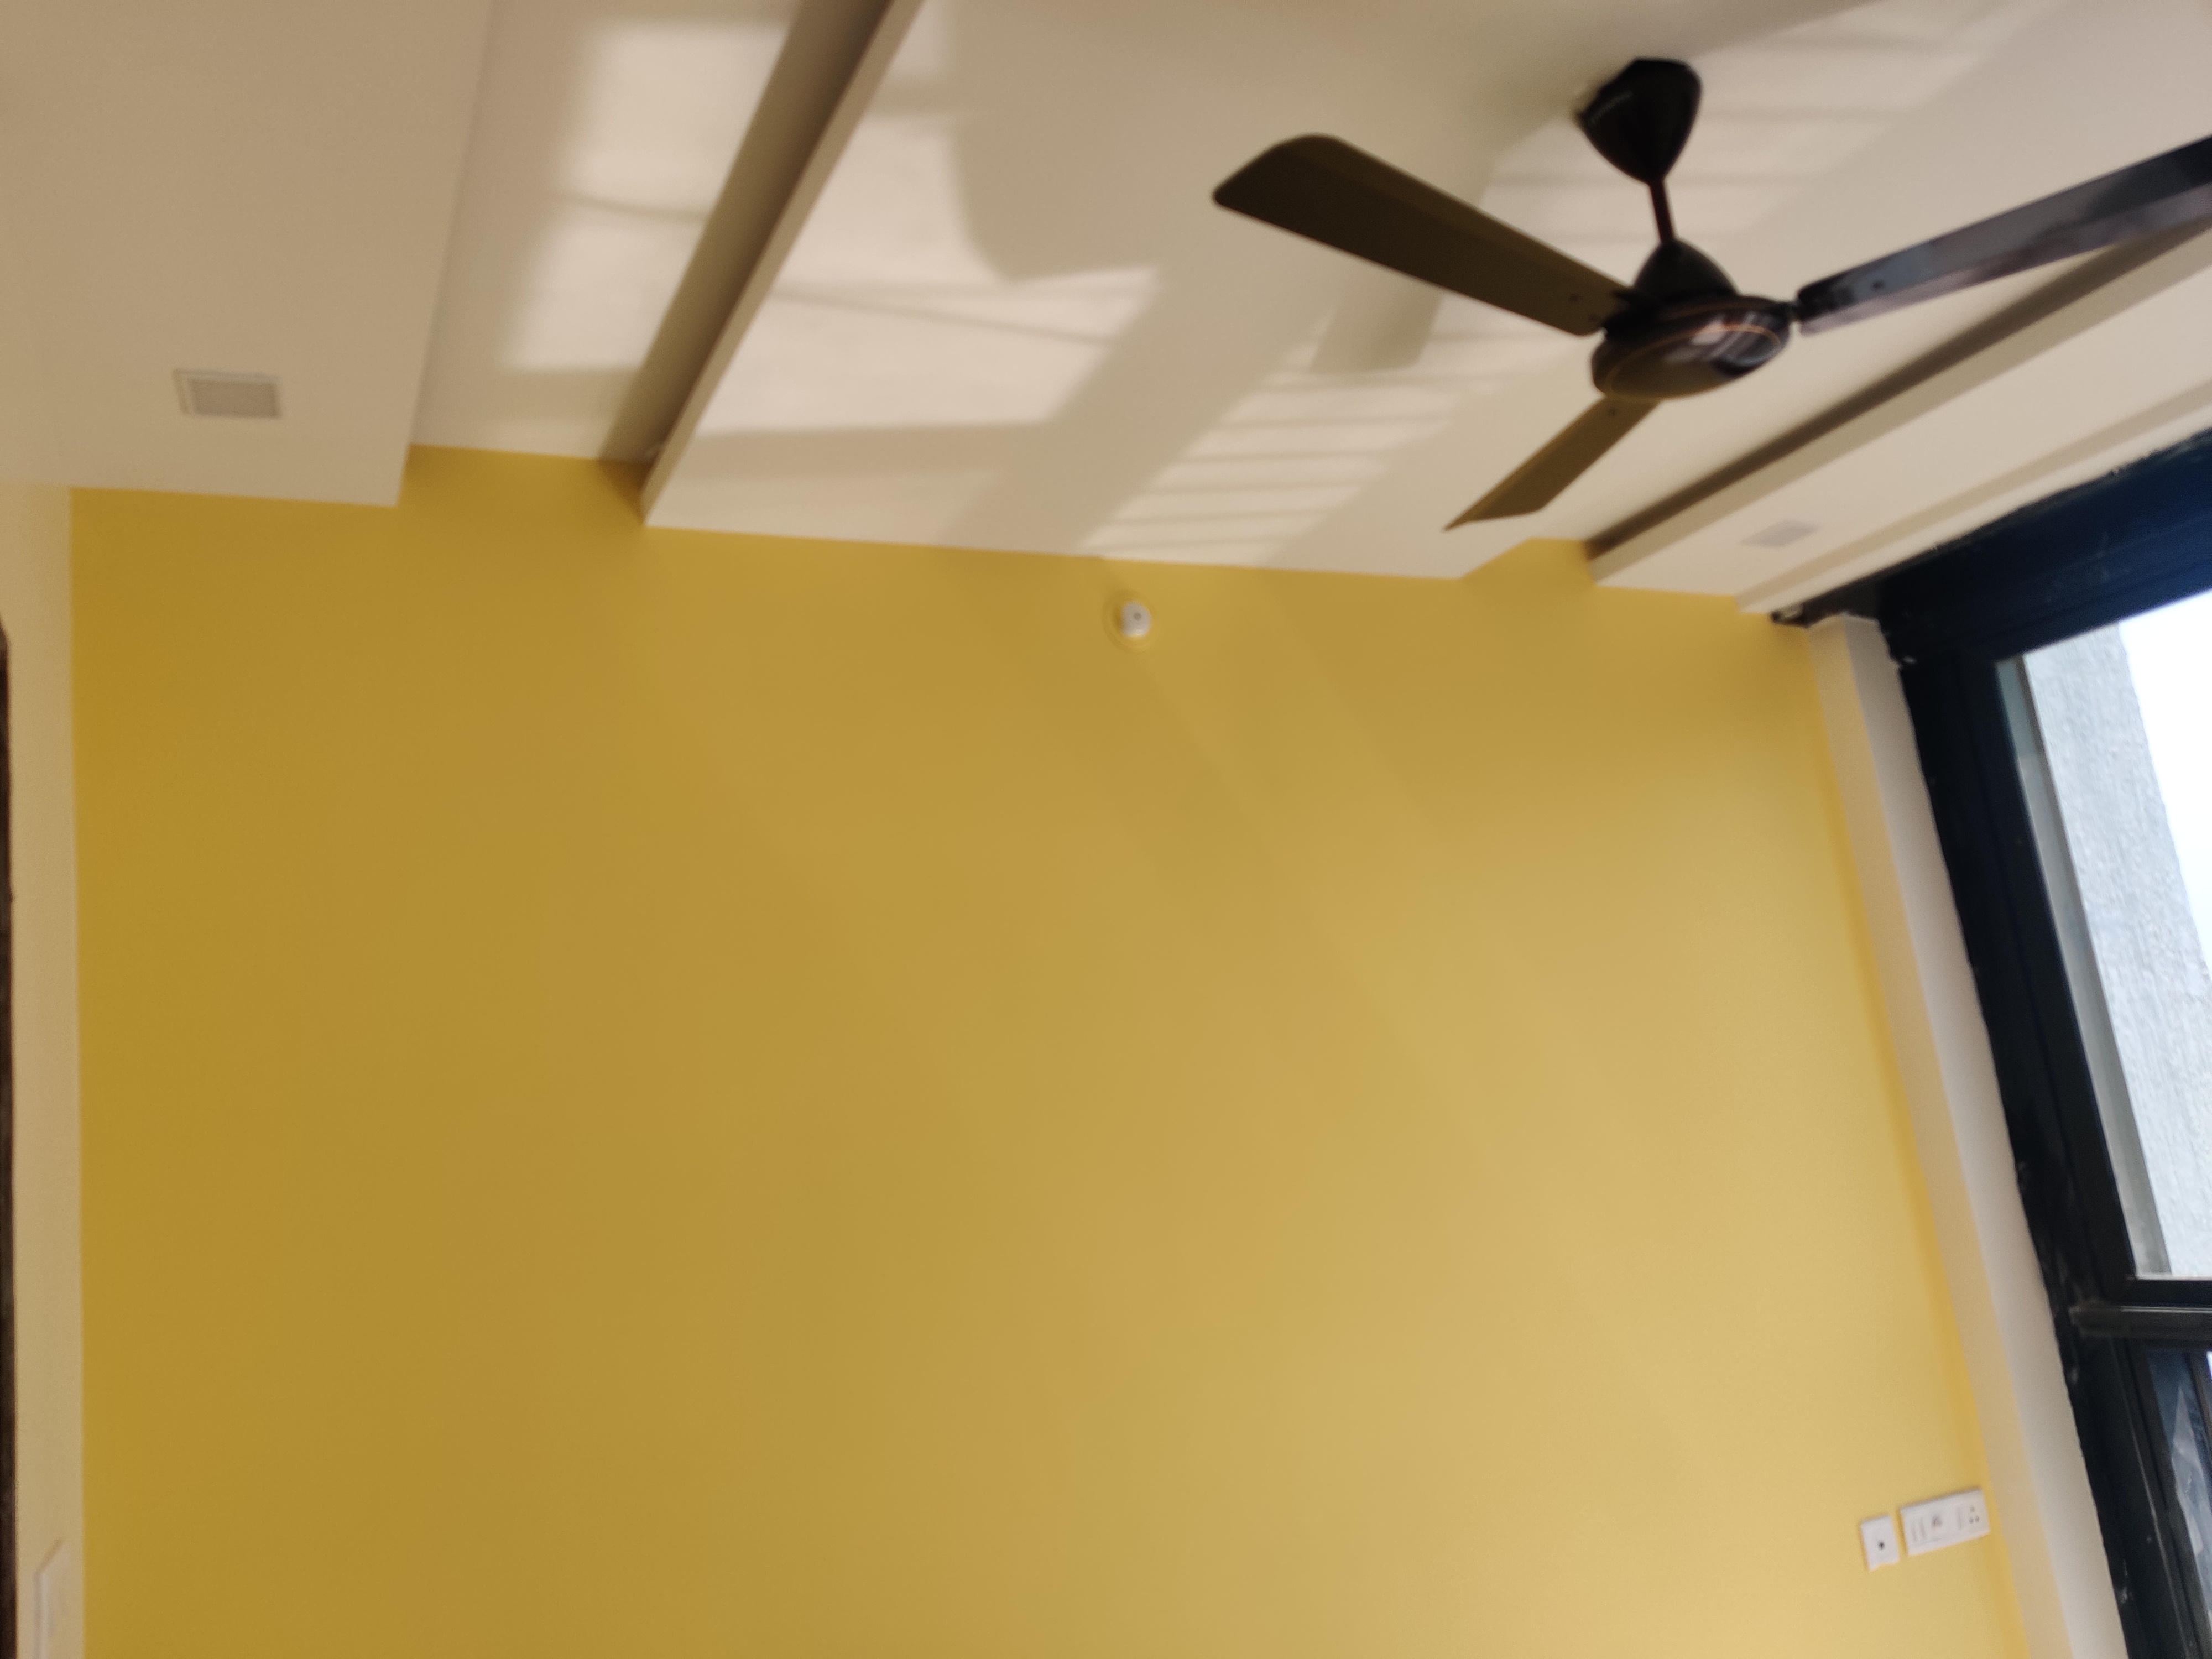 Ghar Pe Service, Painters in Wagholi, Painting Contractors in Wagholi, Residential Painting in Wagholi, Commercial Painting in Wagholi, Flat Painting in Wagholi, top 10, best, nearby , list of, expert, local.